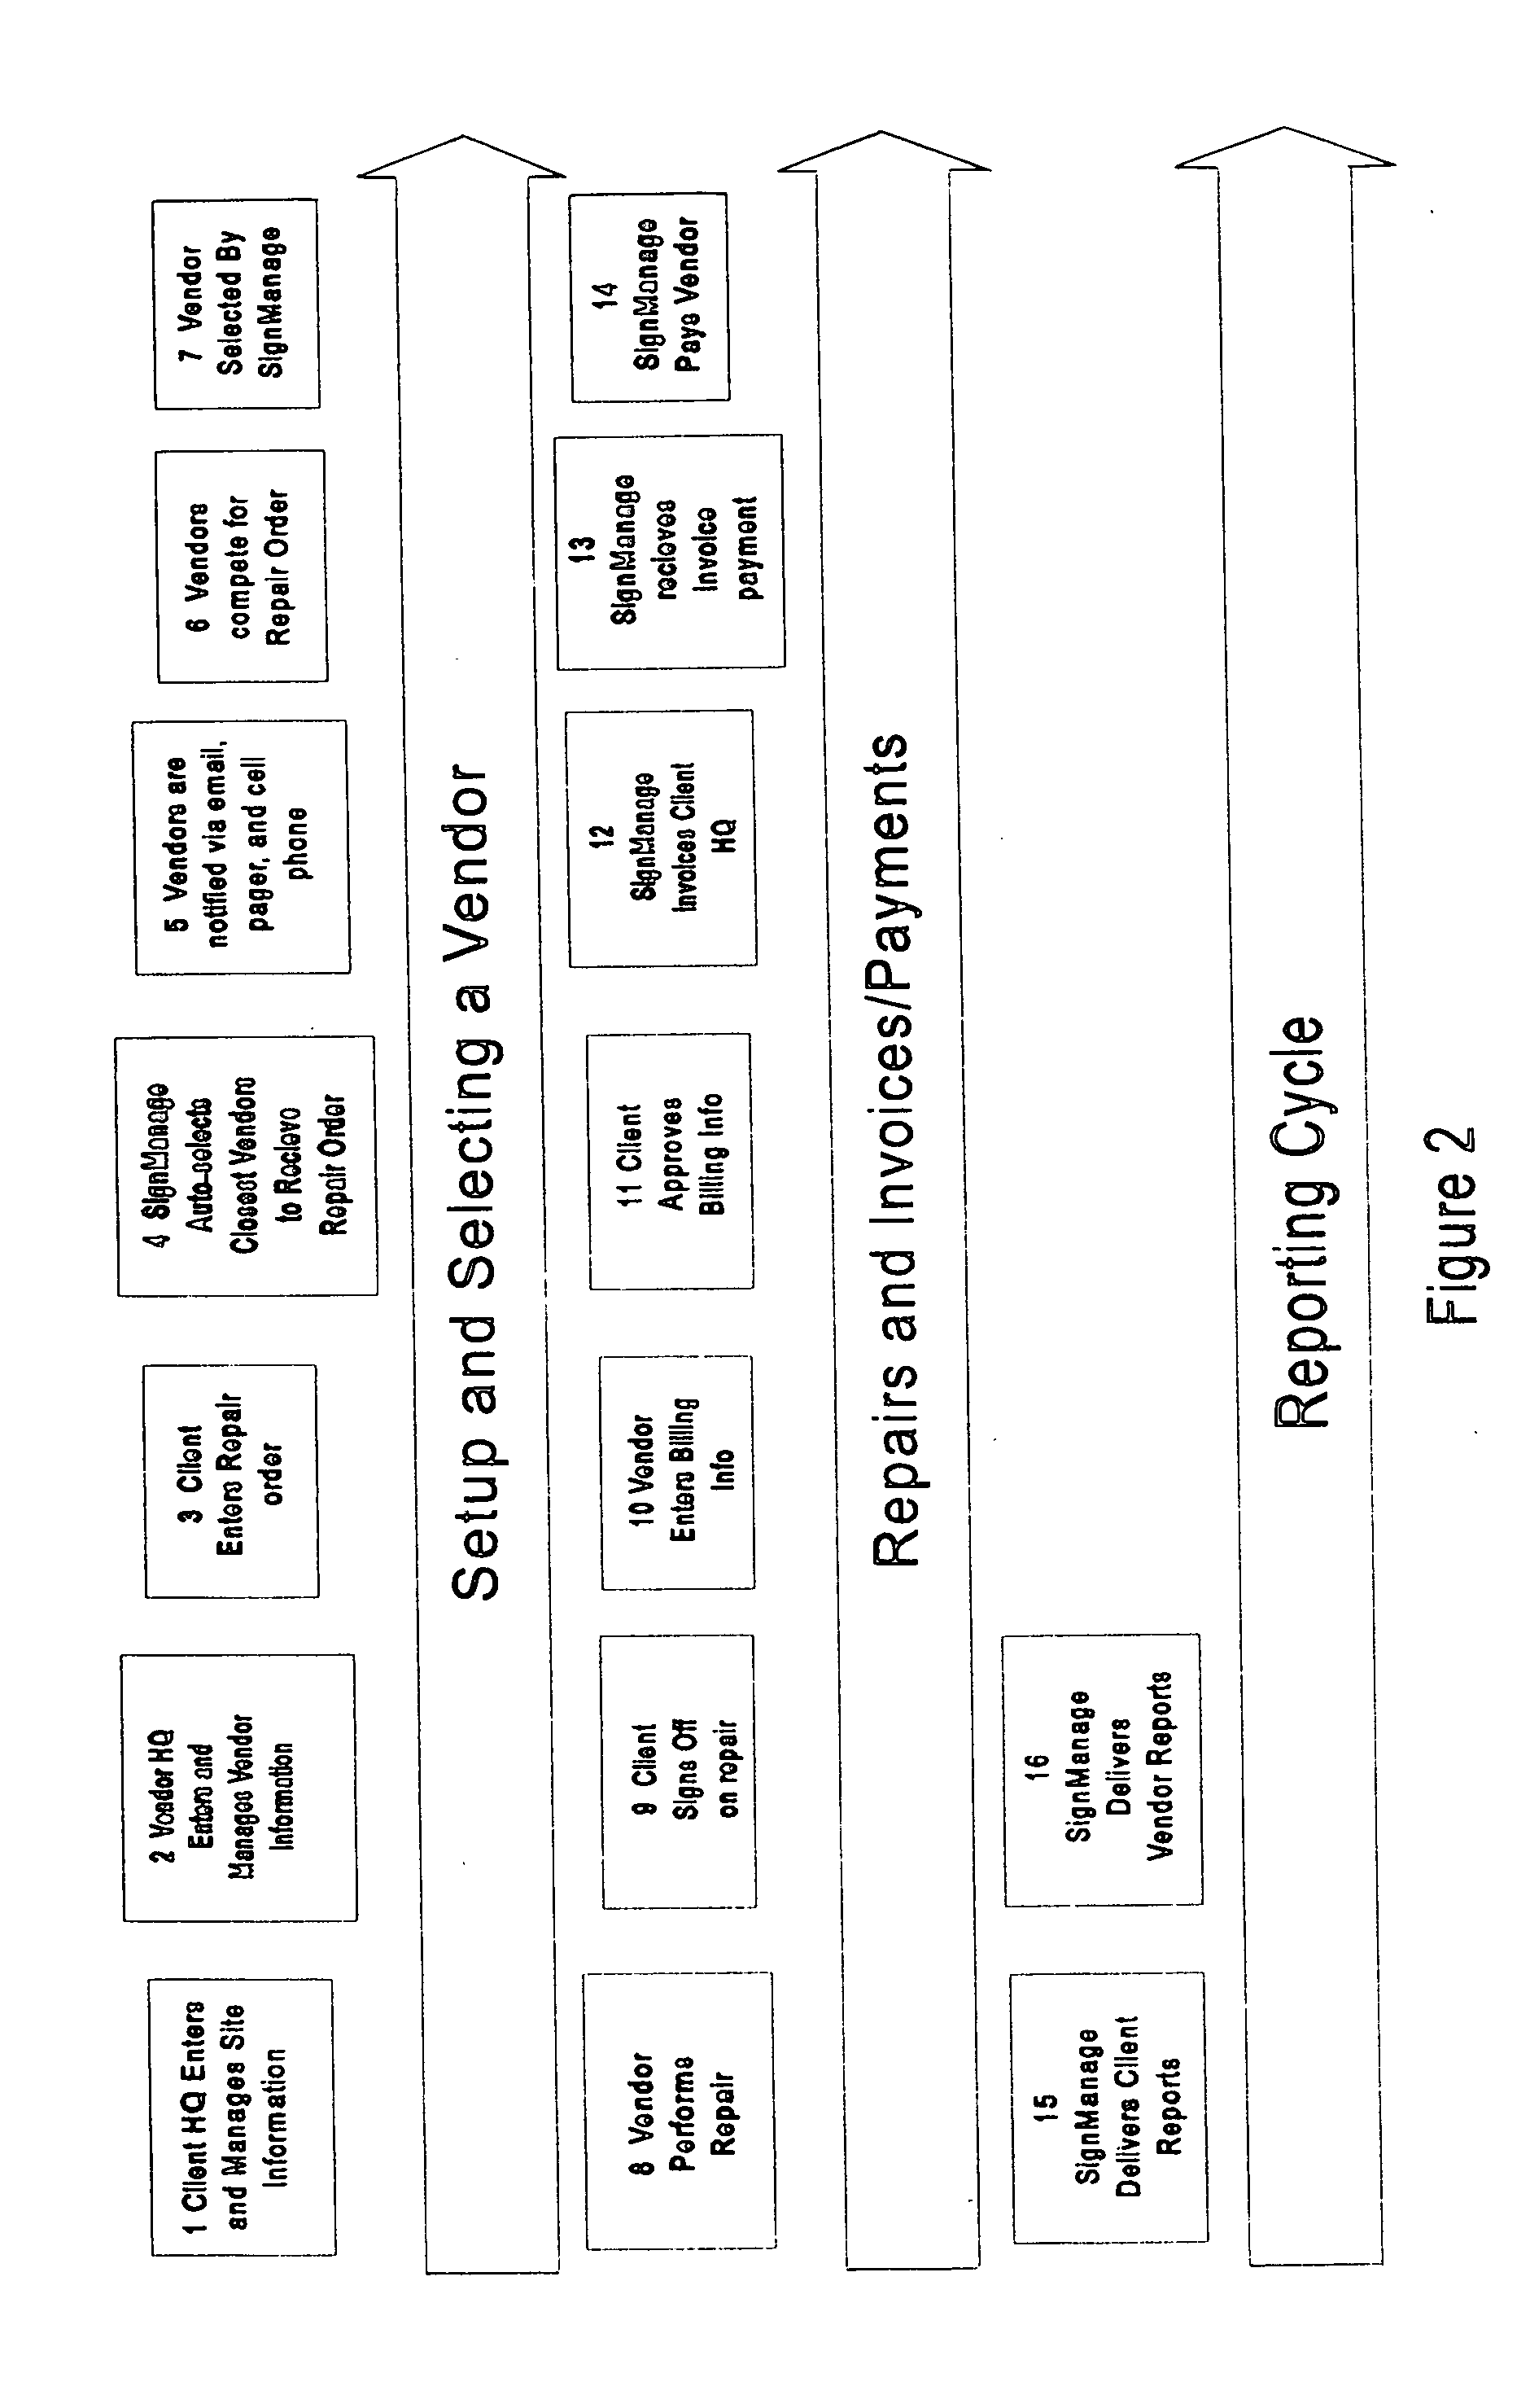 Communication system for electrical maintenance management of different facilities and method therefor